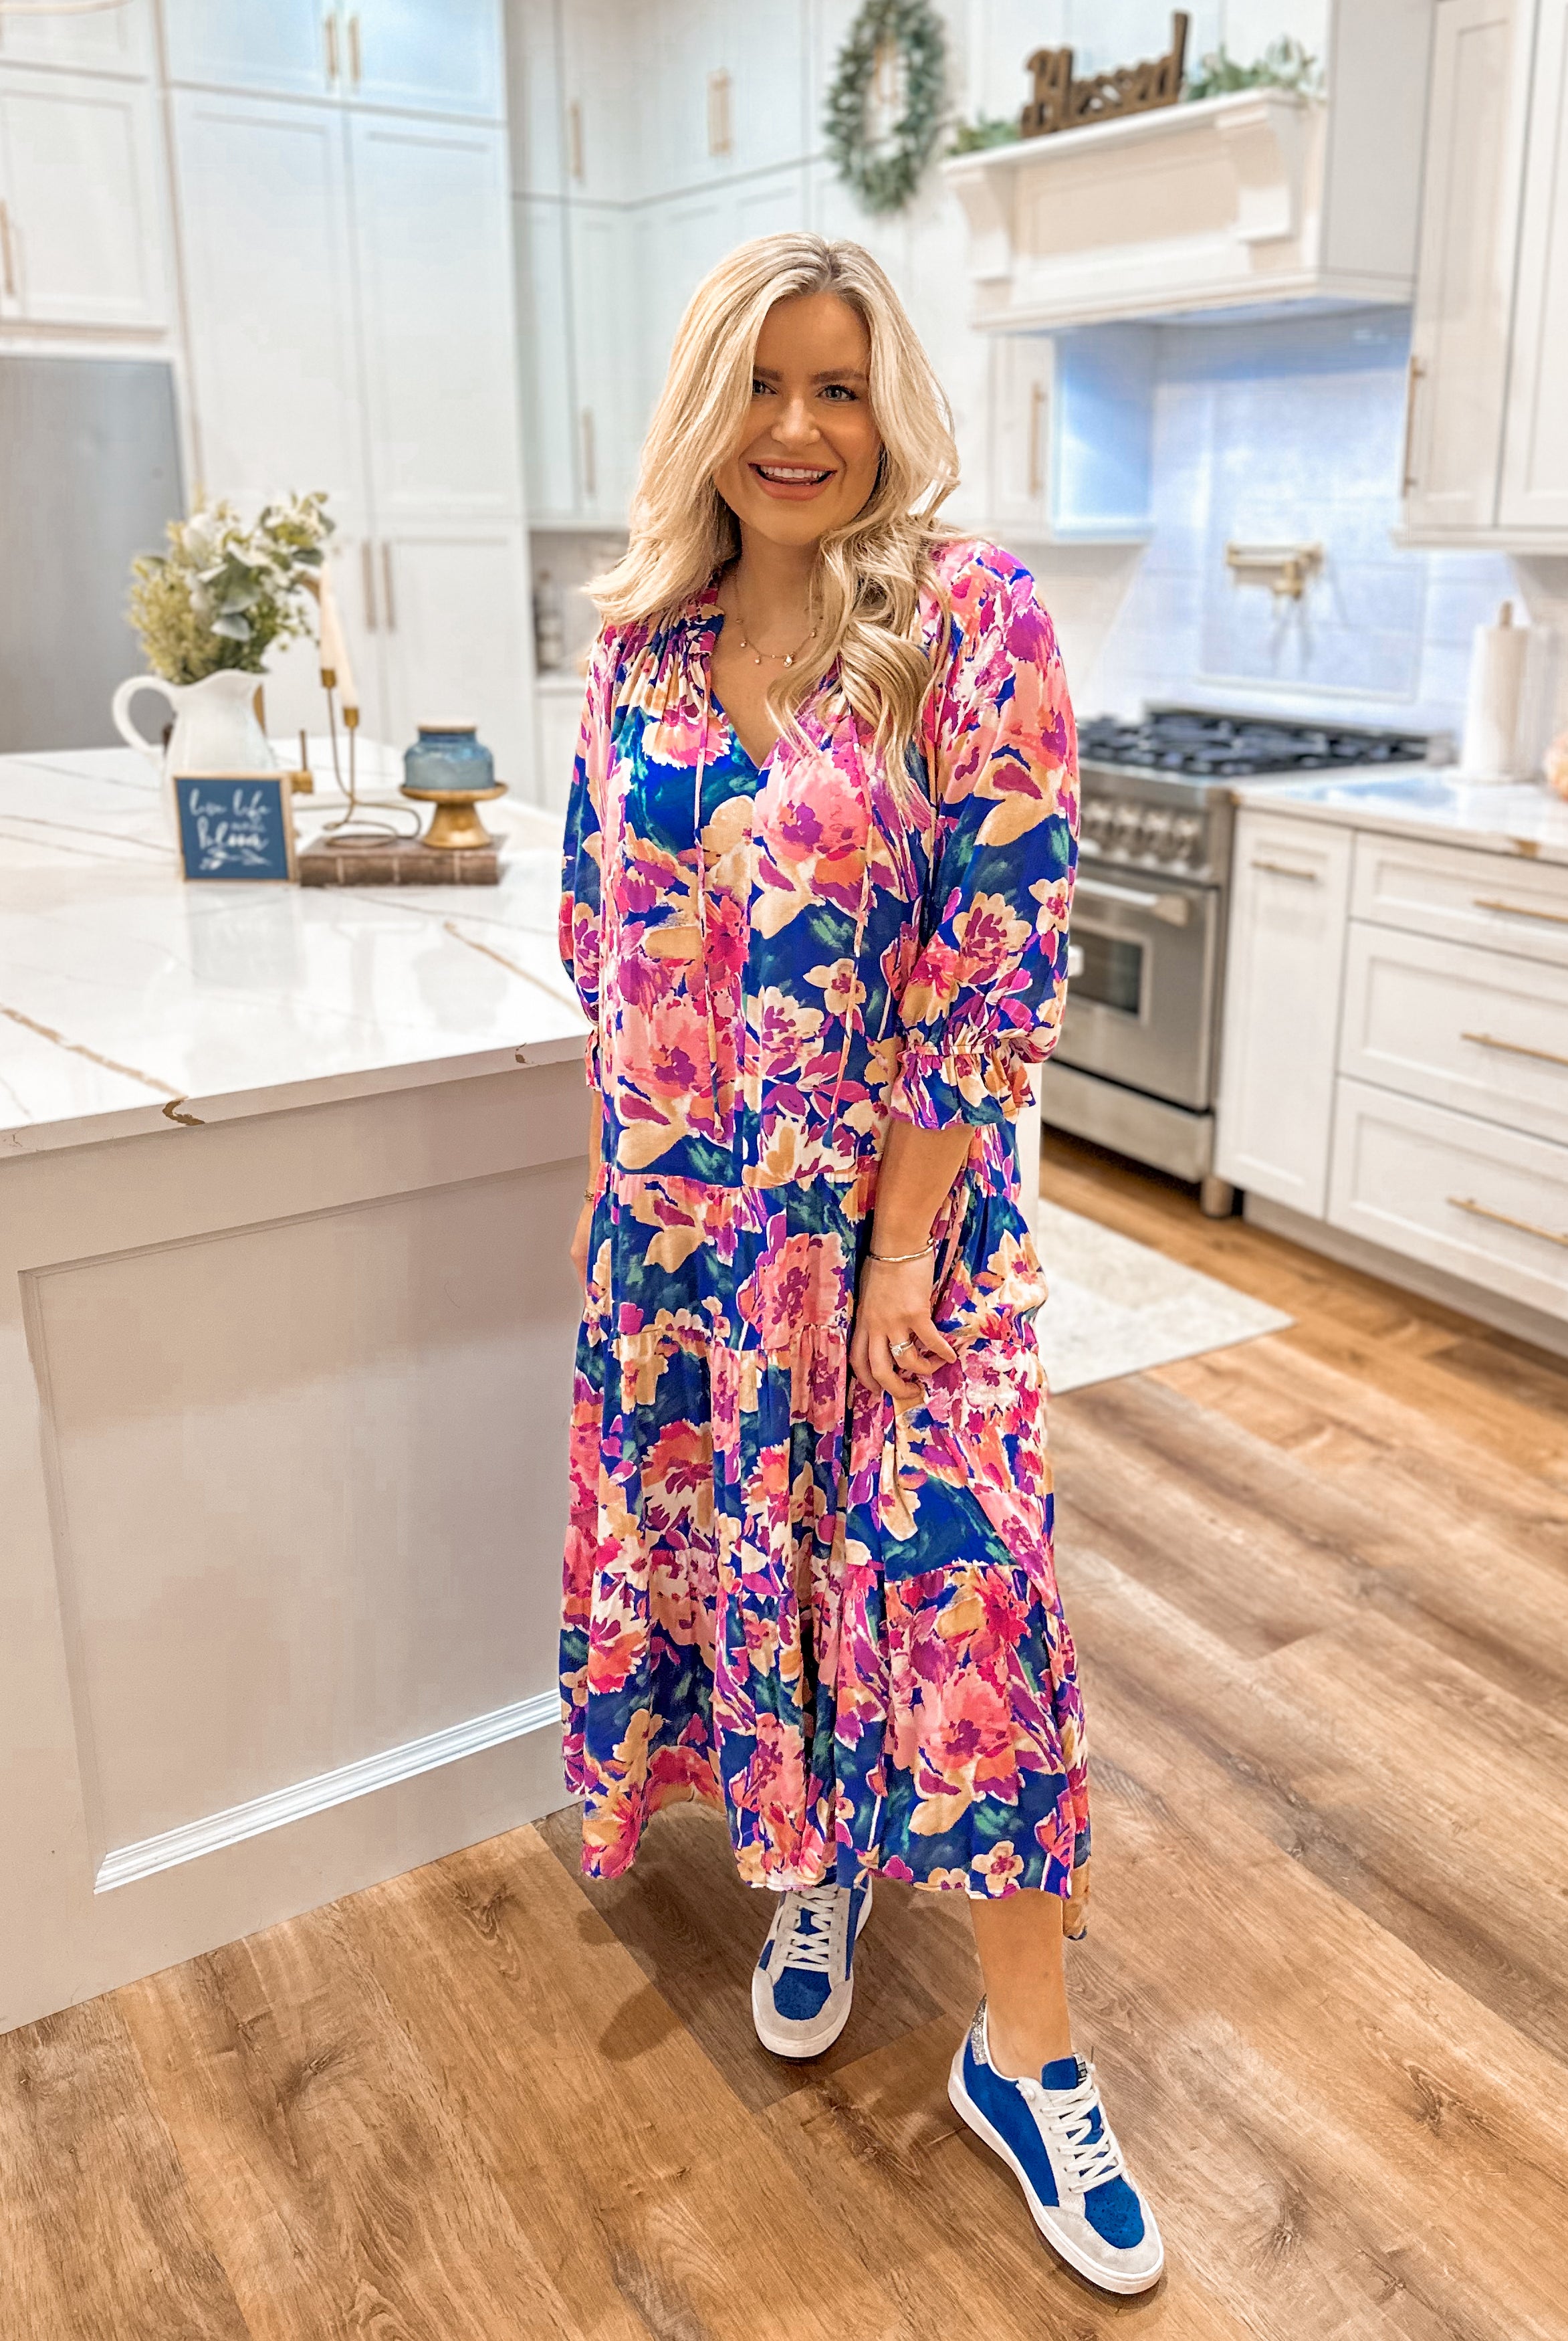 Mandy 3/4 Sleeve Flowy Floral Print Dress - Be You Boutique